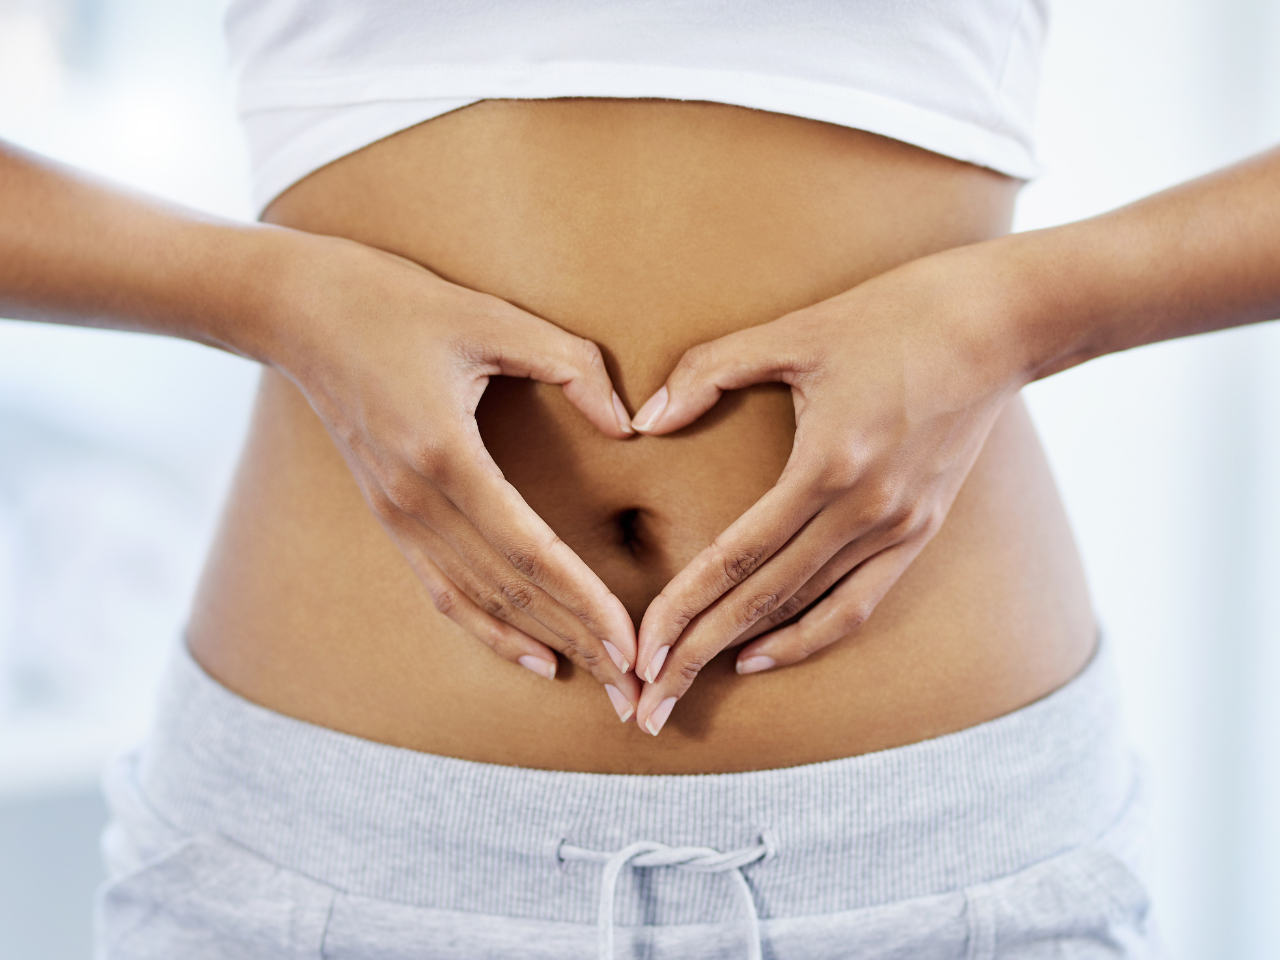 Lady in white outfit posing with a heart shaped hand at the center of her stomach to illustrate a healthy gut